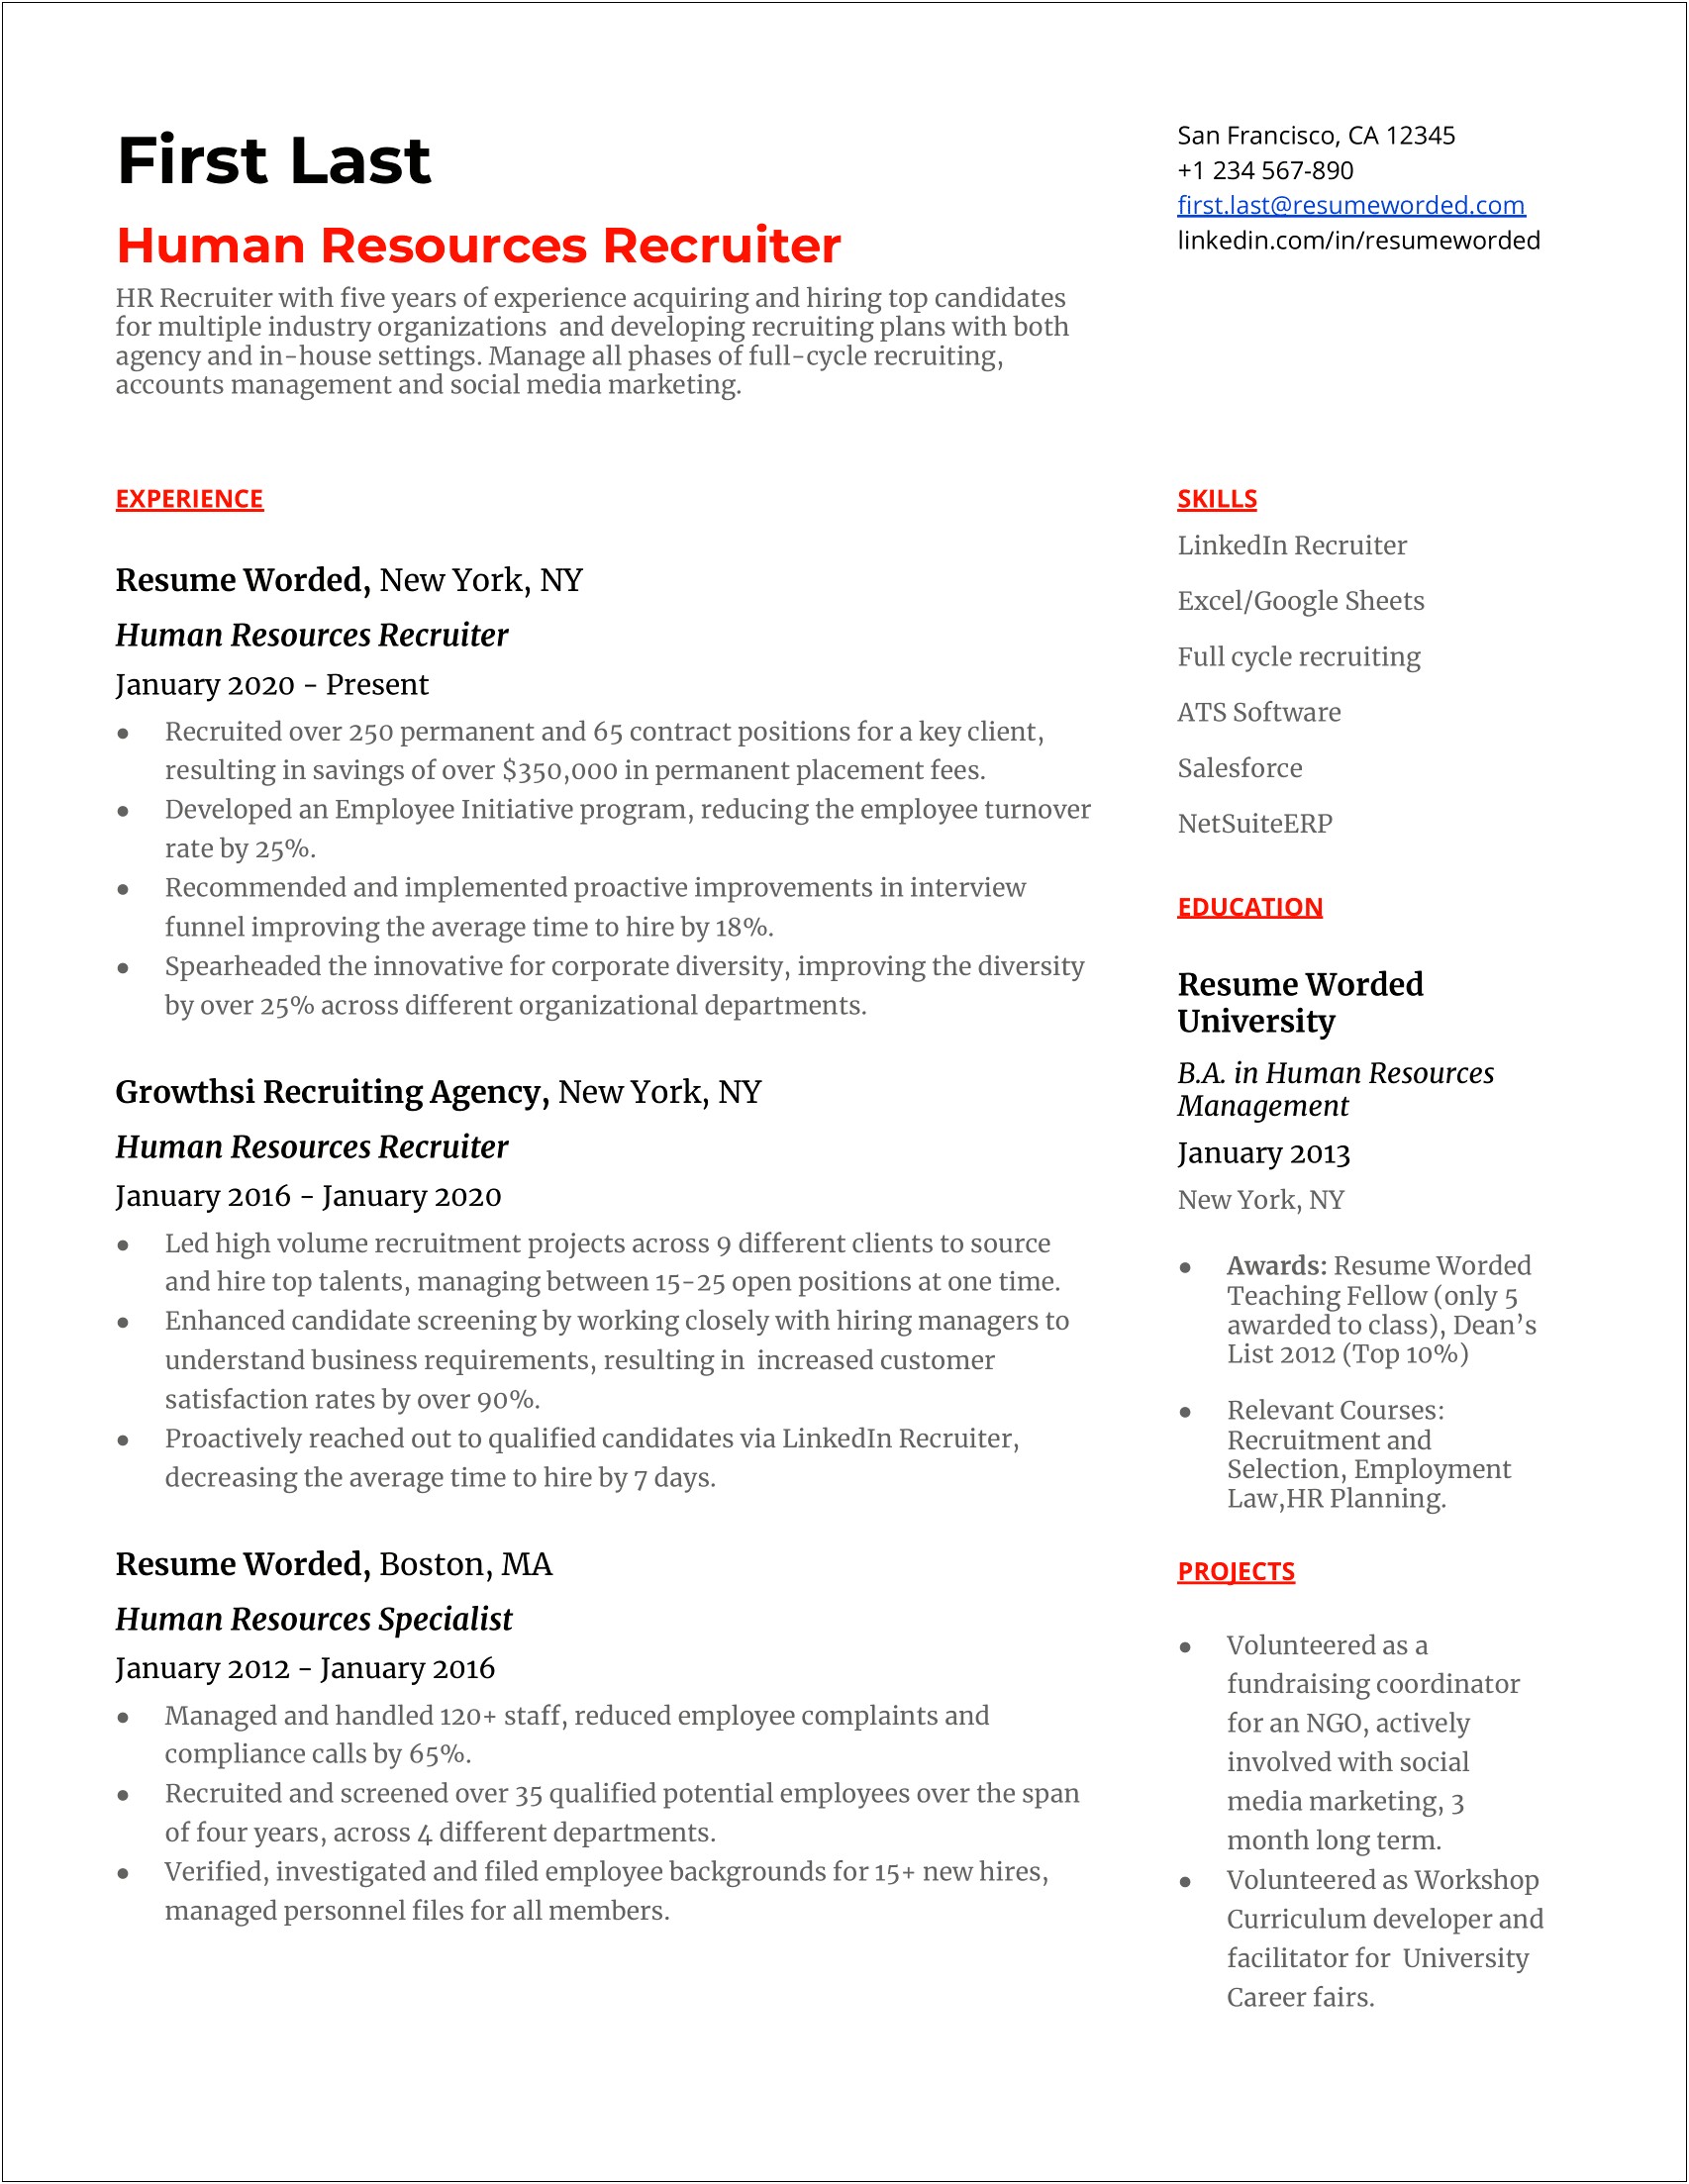 Resume Examples With Relevant Coursework Sections Pdf